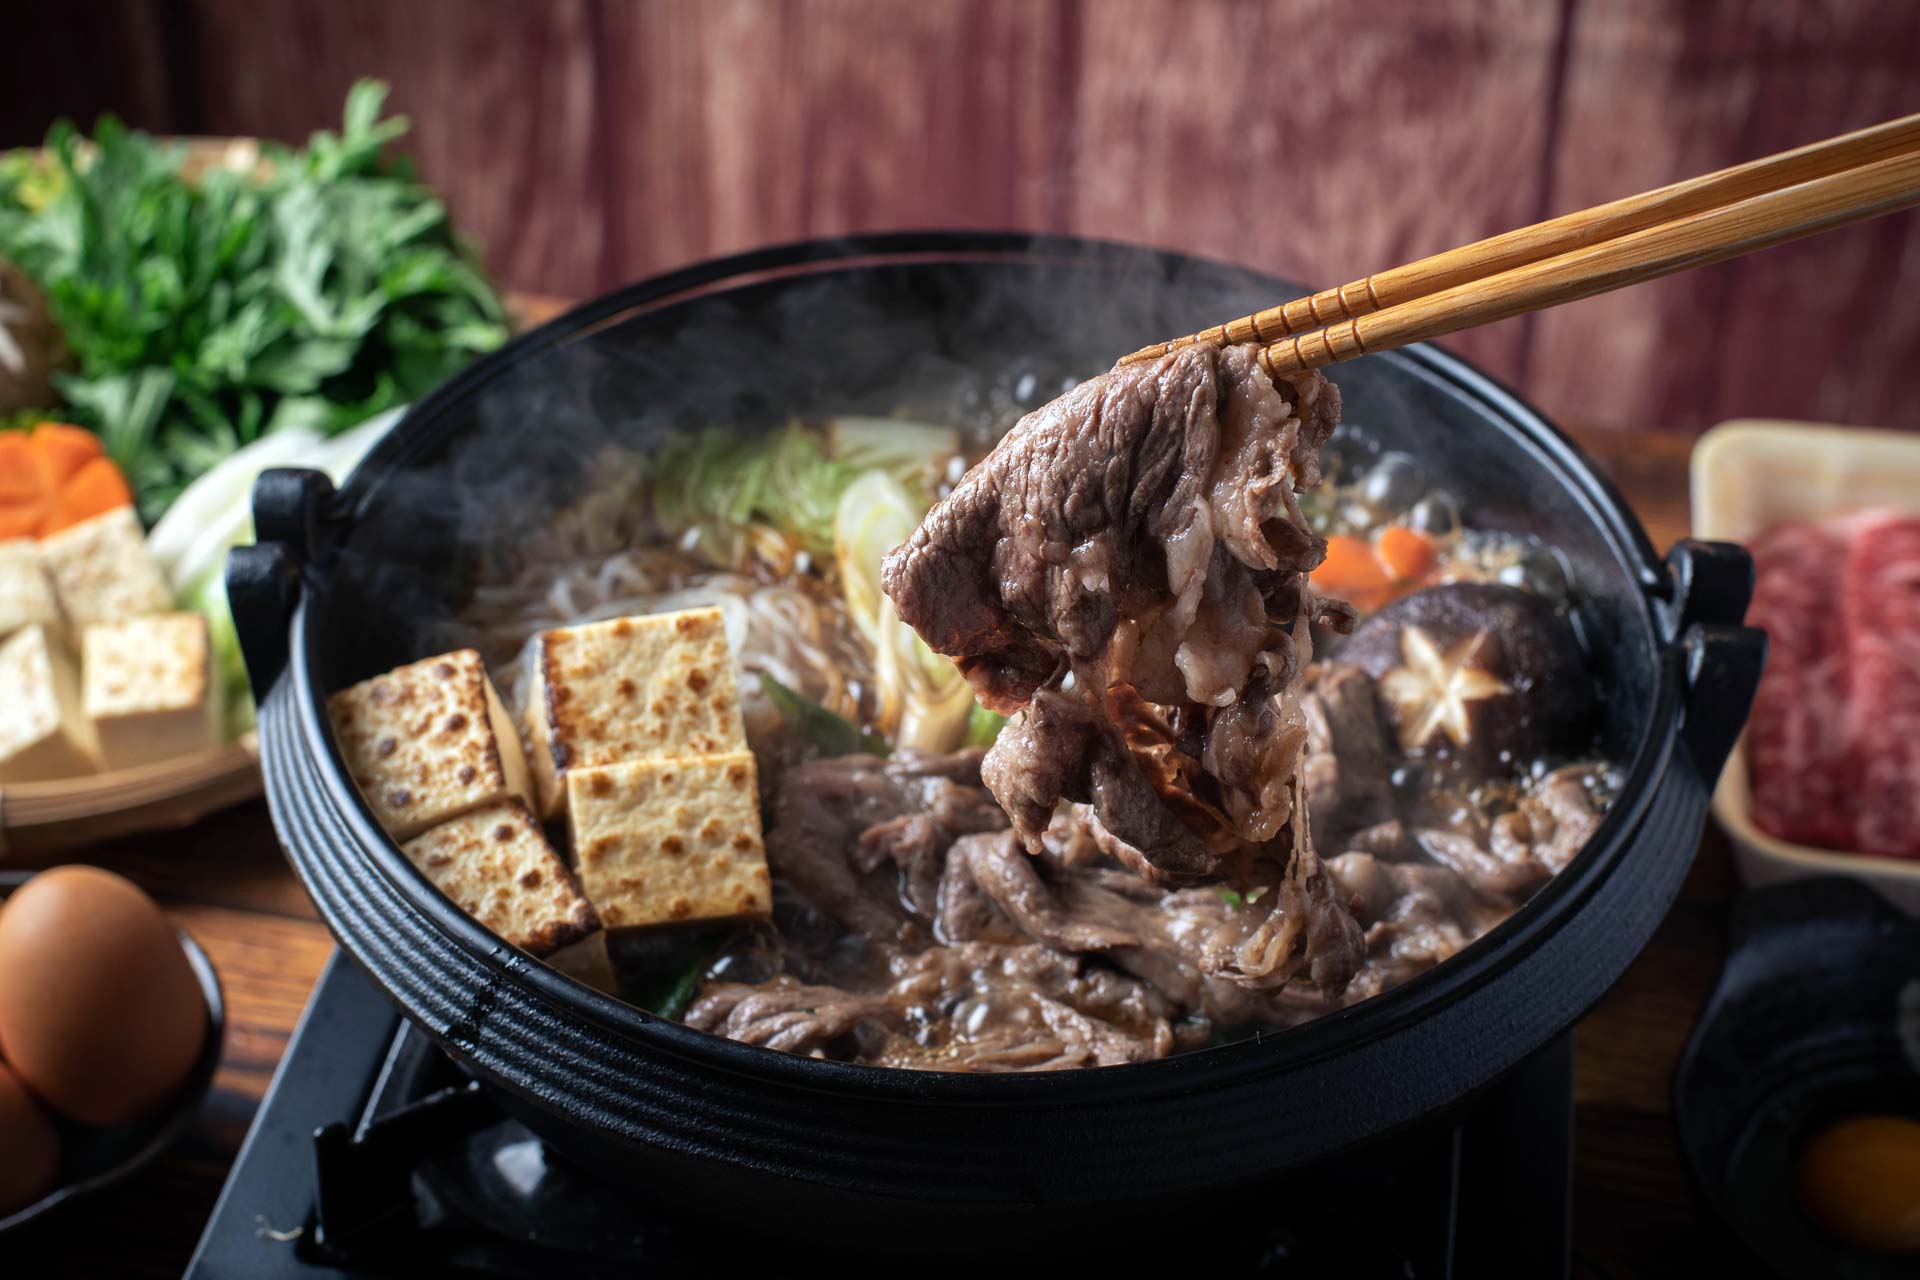 Chopsticks picking up cooked beef out of a bowl of soup